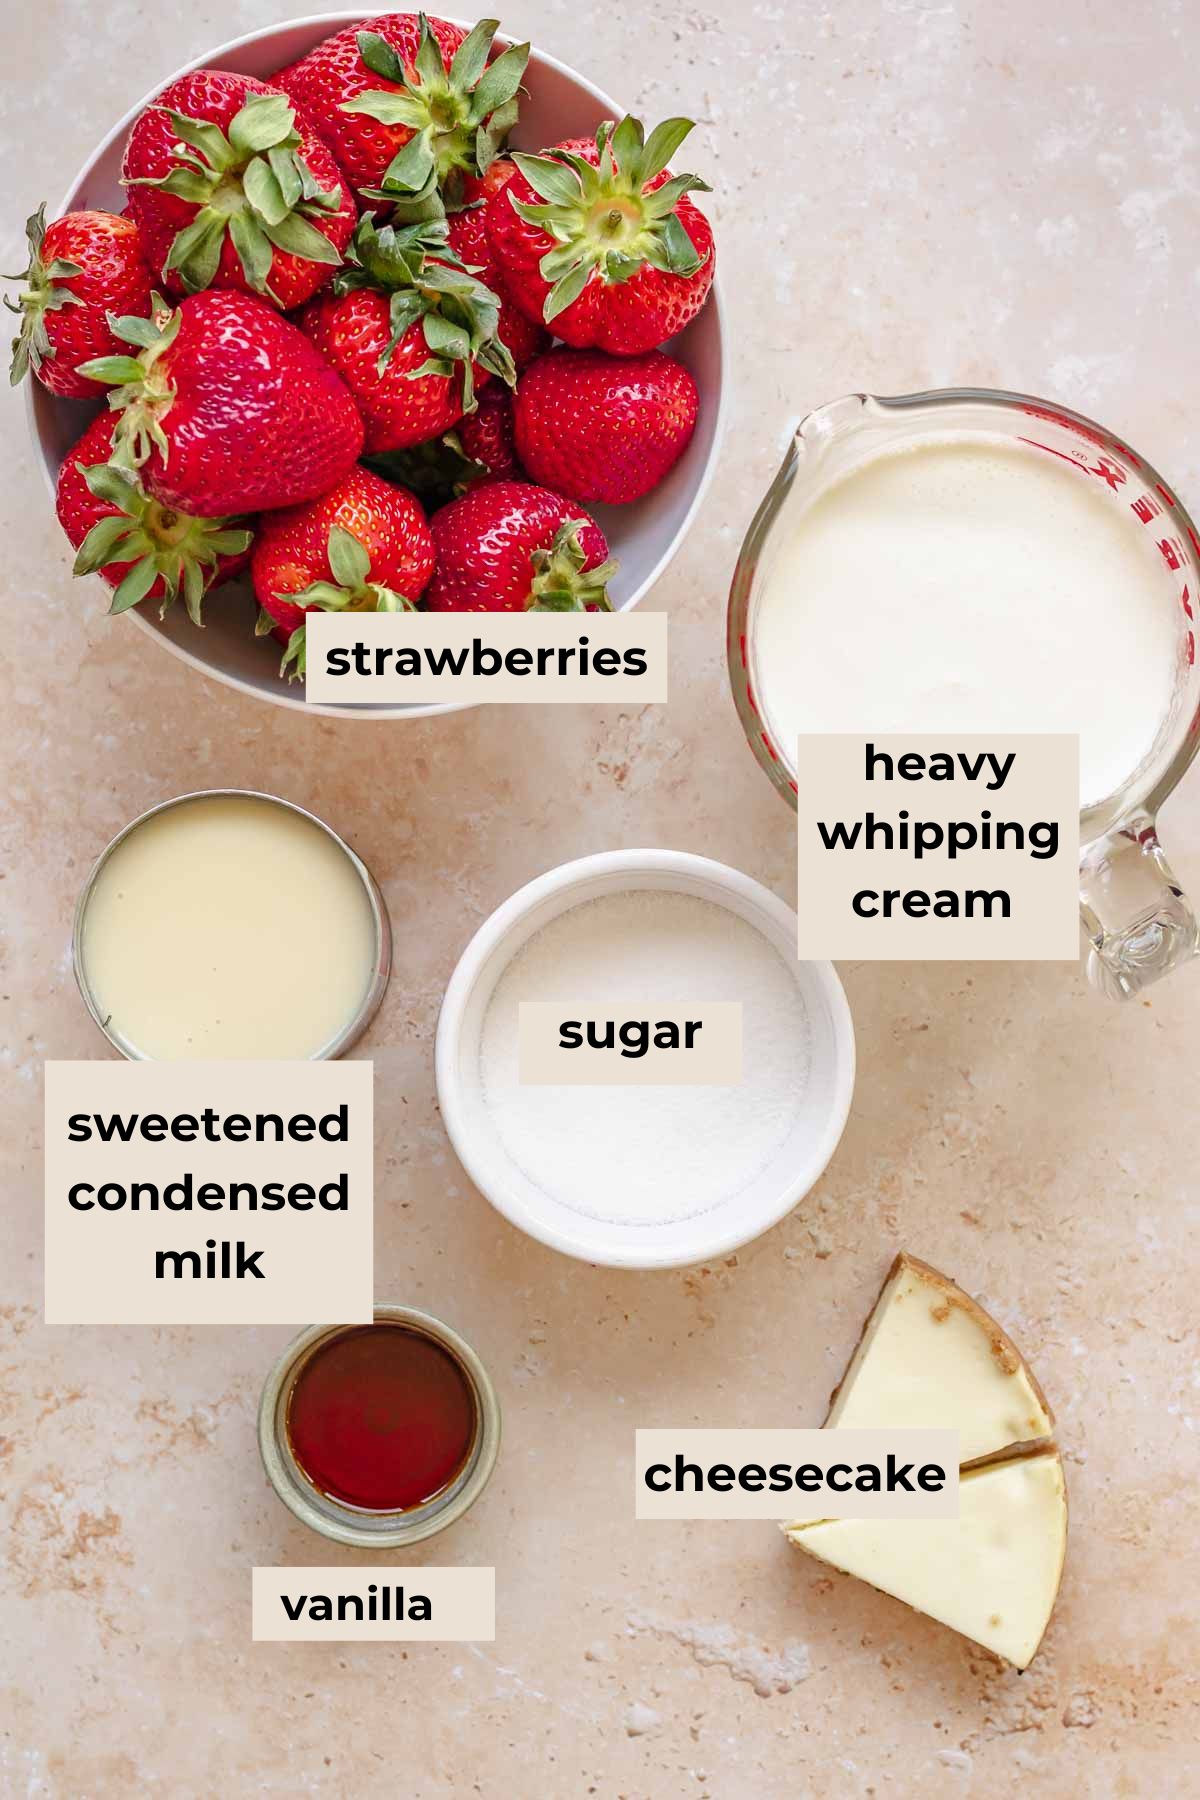 Ingredients for strawberry no churn ice cream.